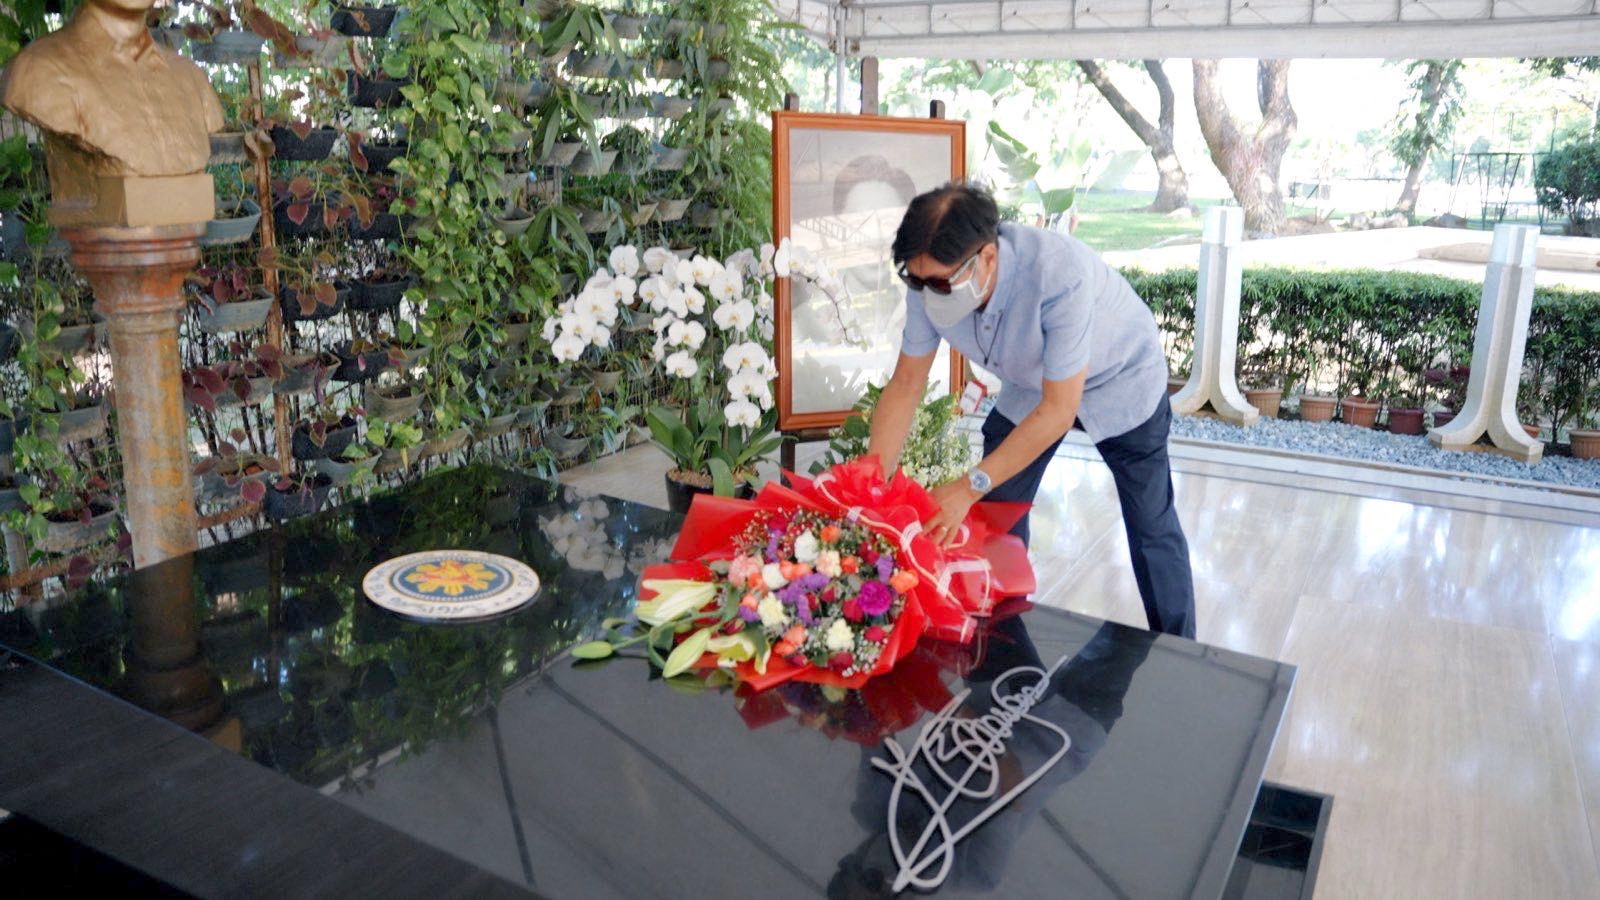 Presidential candidate Ferdinand "Bongbong" Marcos Jr. visits the grave of his father former President Ferdinand E. Marcos